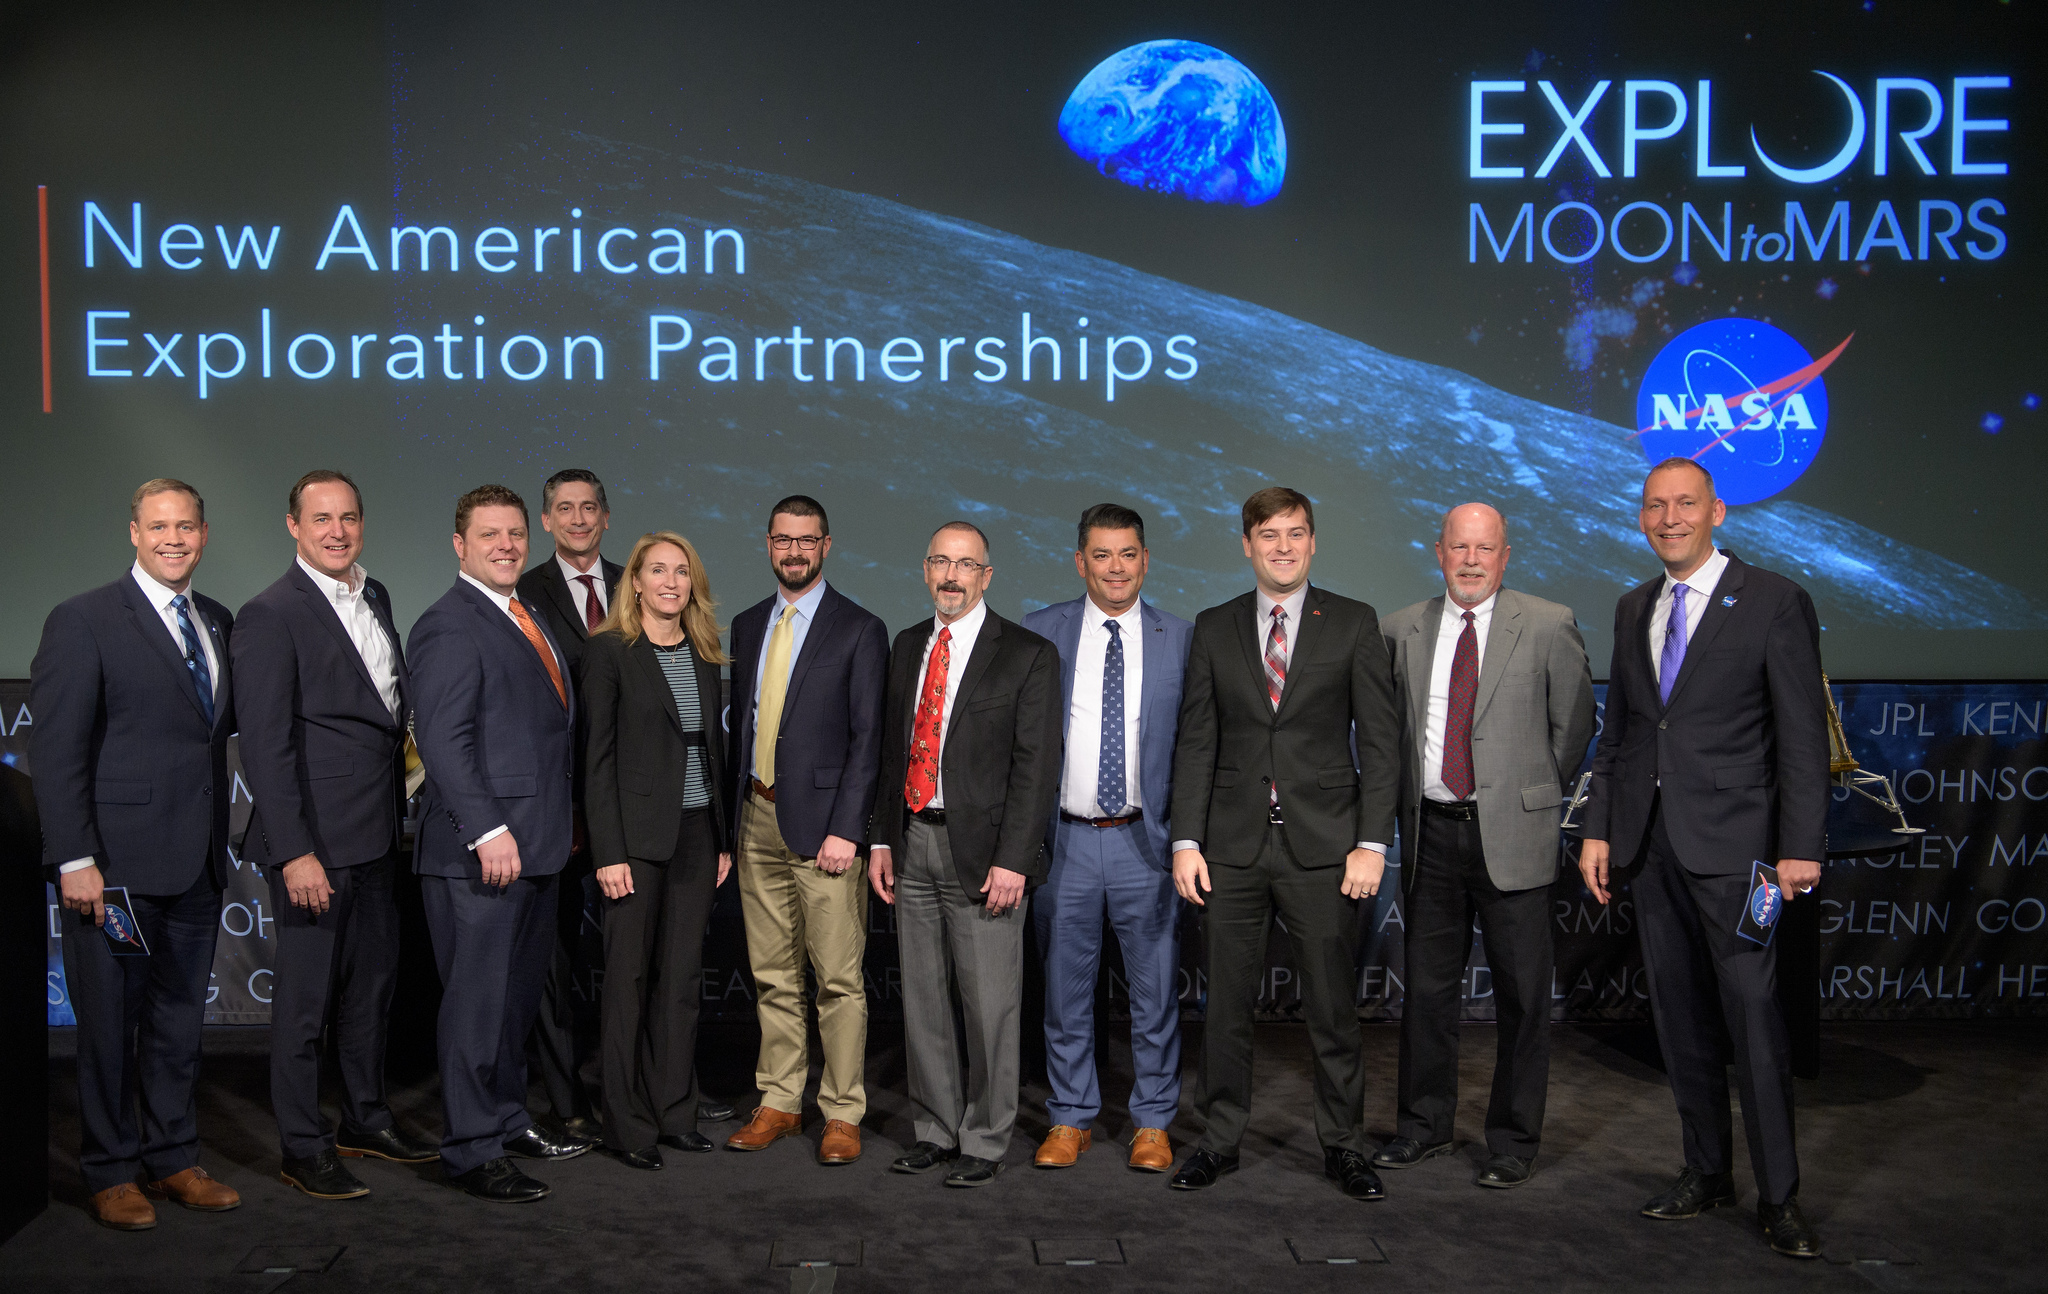 Nine U.S. companies are eligible to bid on NASA delivery services to the lunar surface through Commercial Lunar Payload Services